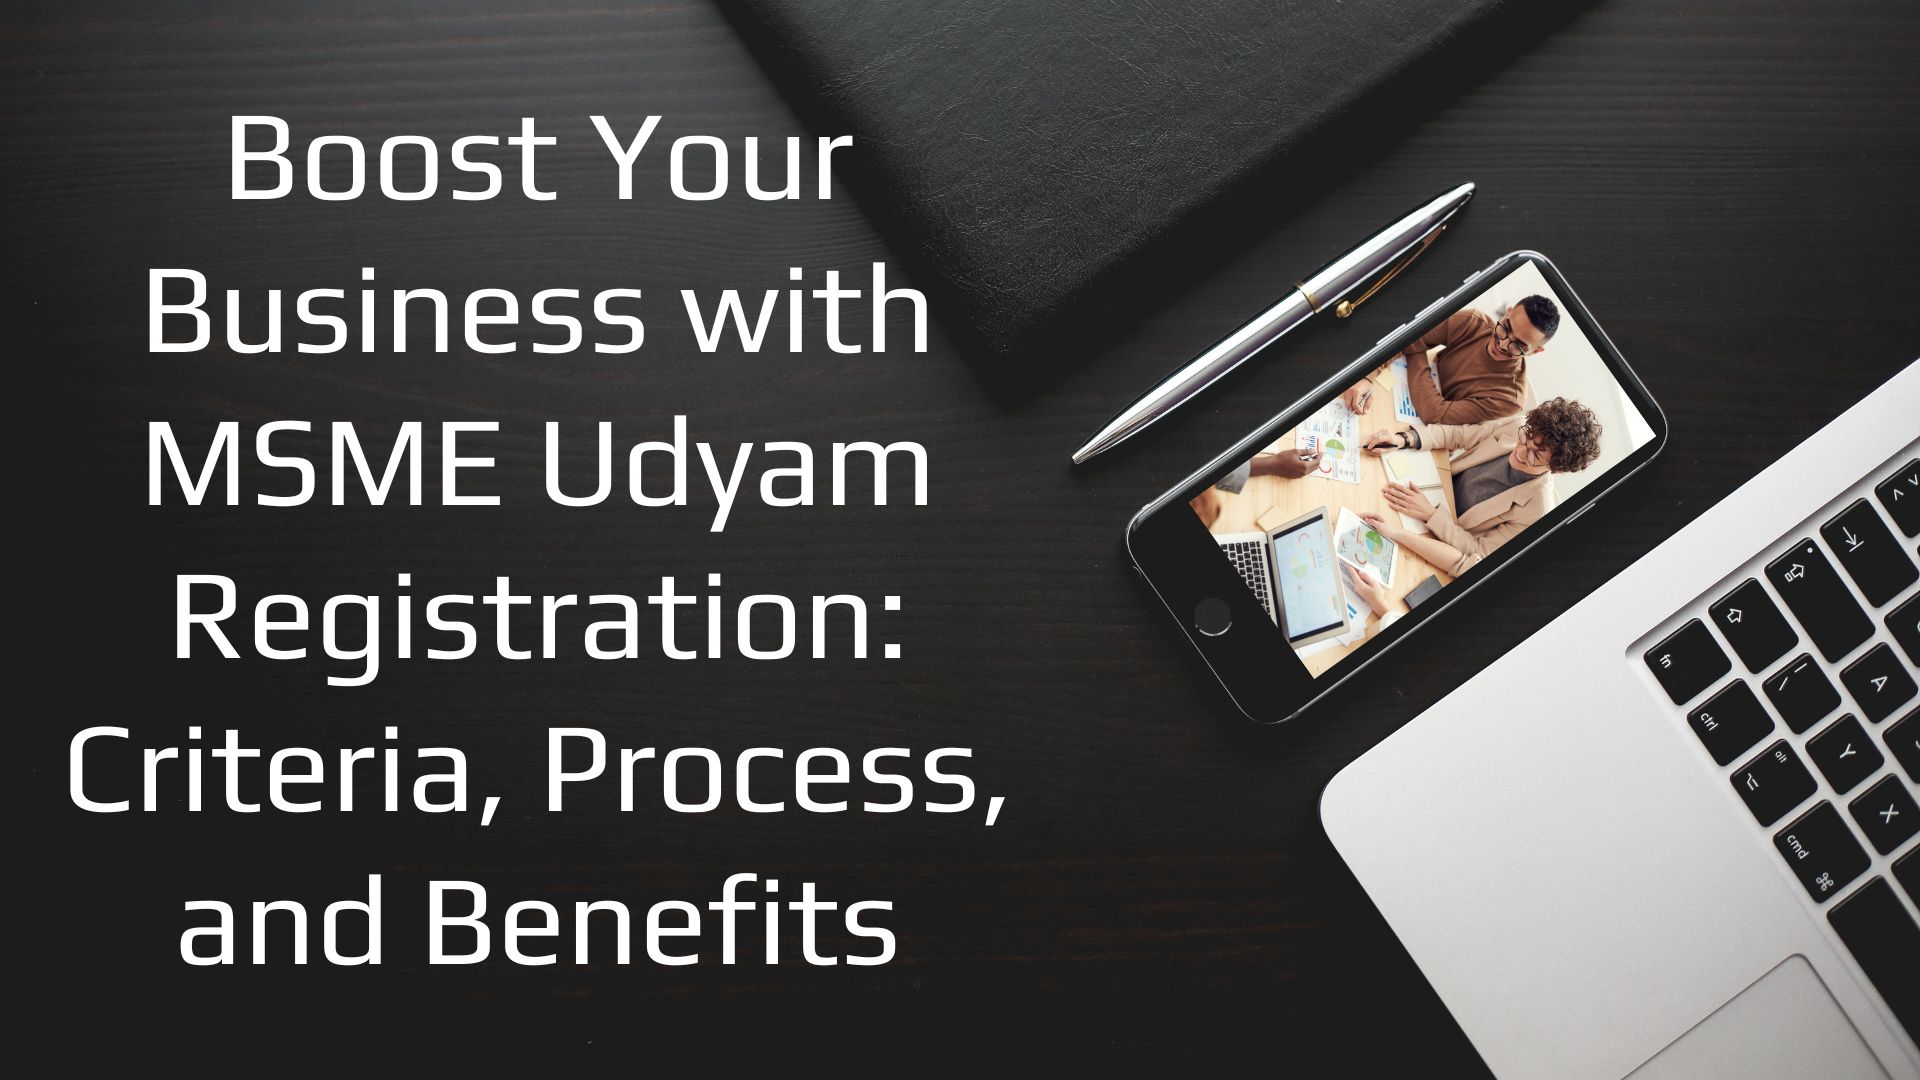 Boost Your Business with MSME Udyam Registration Criteria, Process, and Benefits